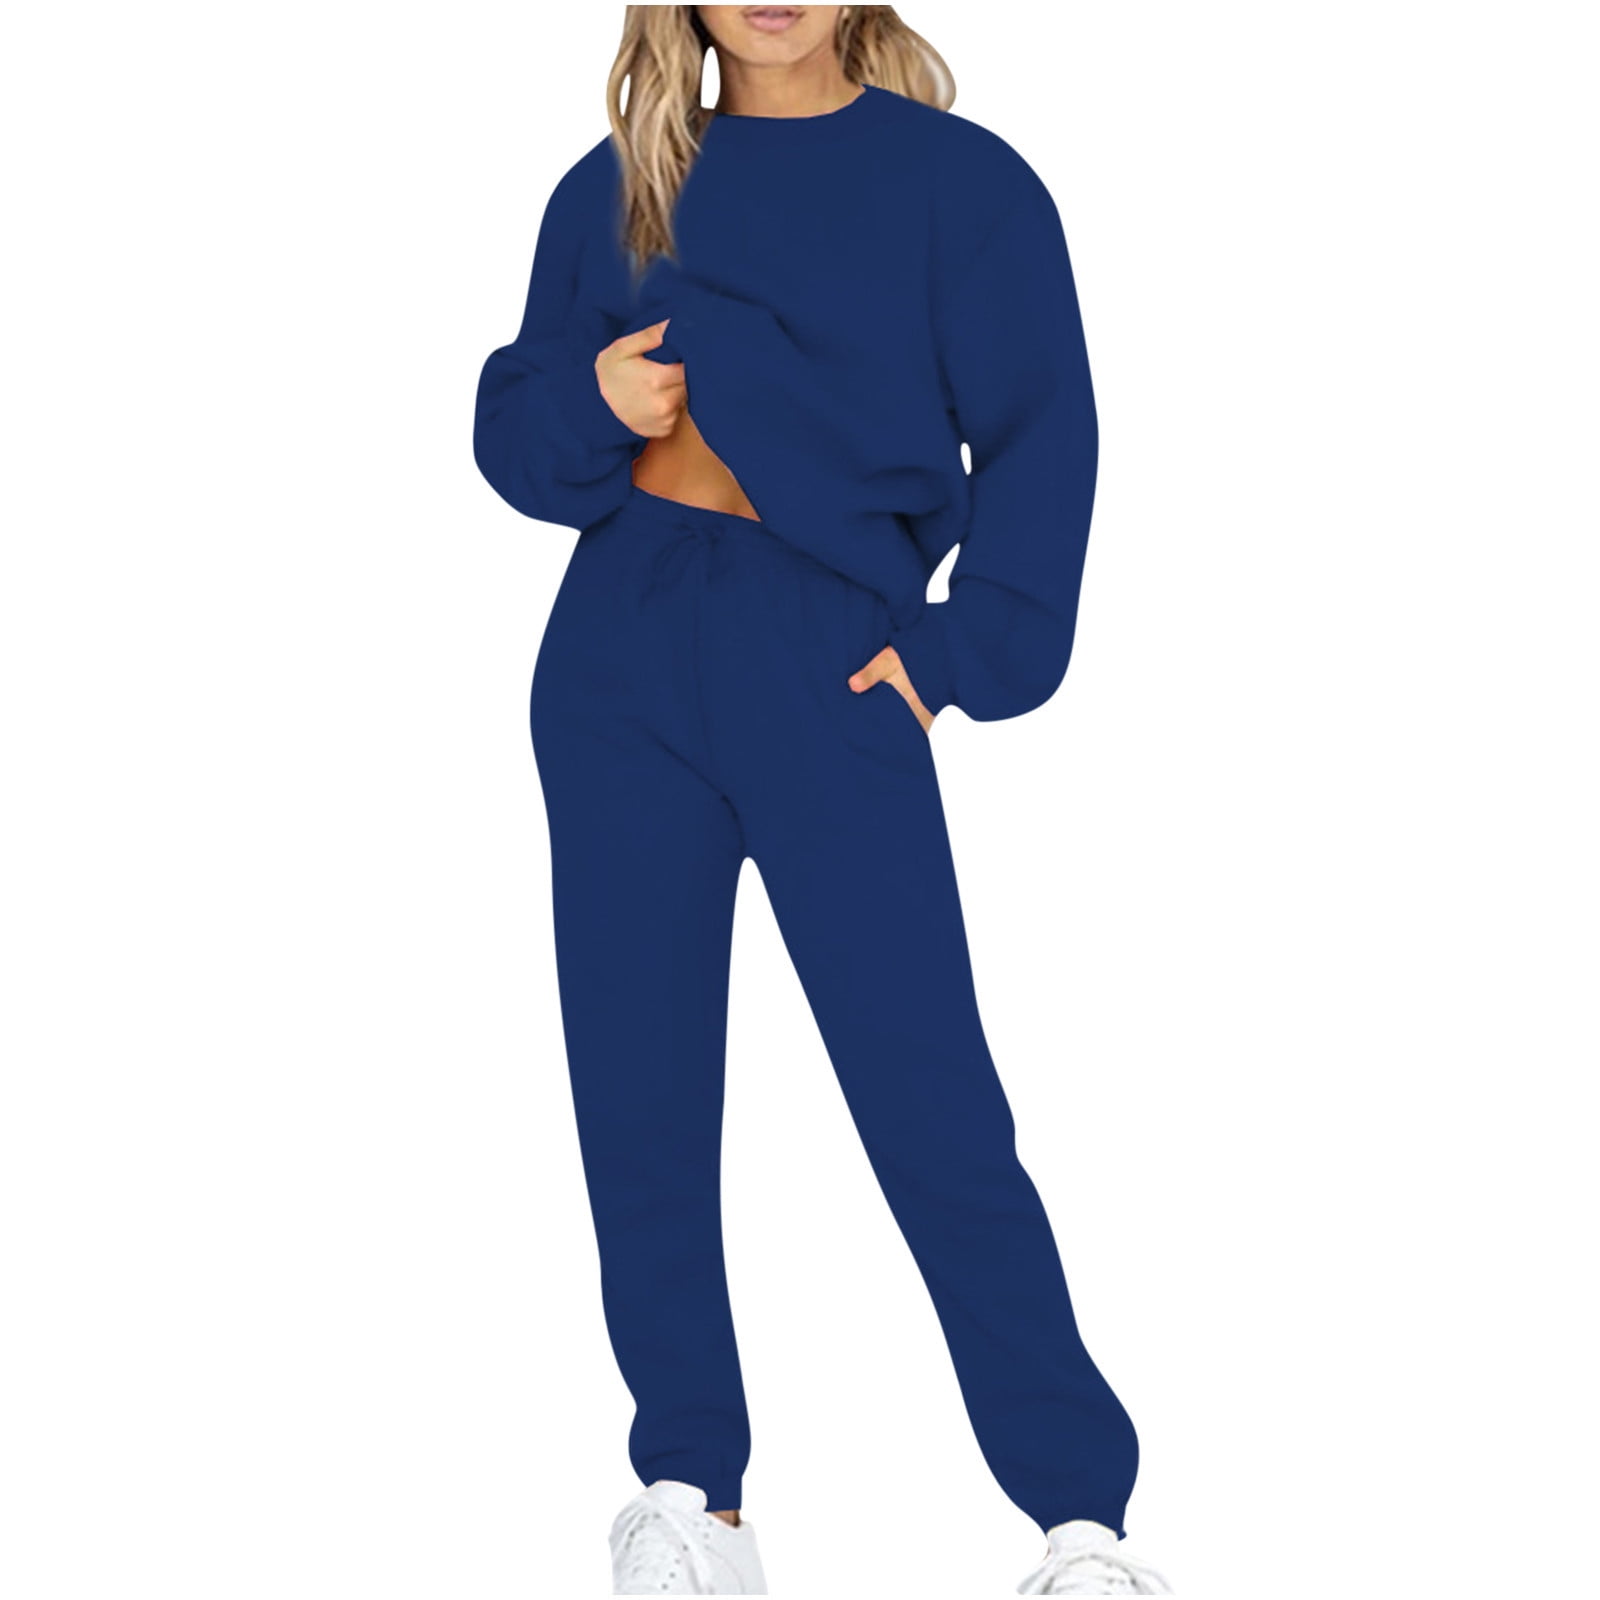 Sweatsuits Set for Women 2 Piece Jogging Outfits Long Sleeve Hoodie  Sweatshirt Sweatpants Tracksuit Fall Winter Clothes Women Clothes 